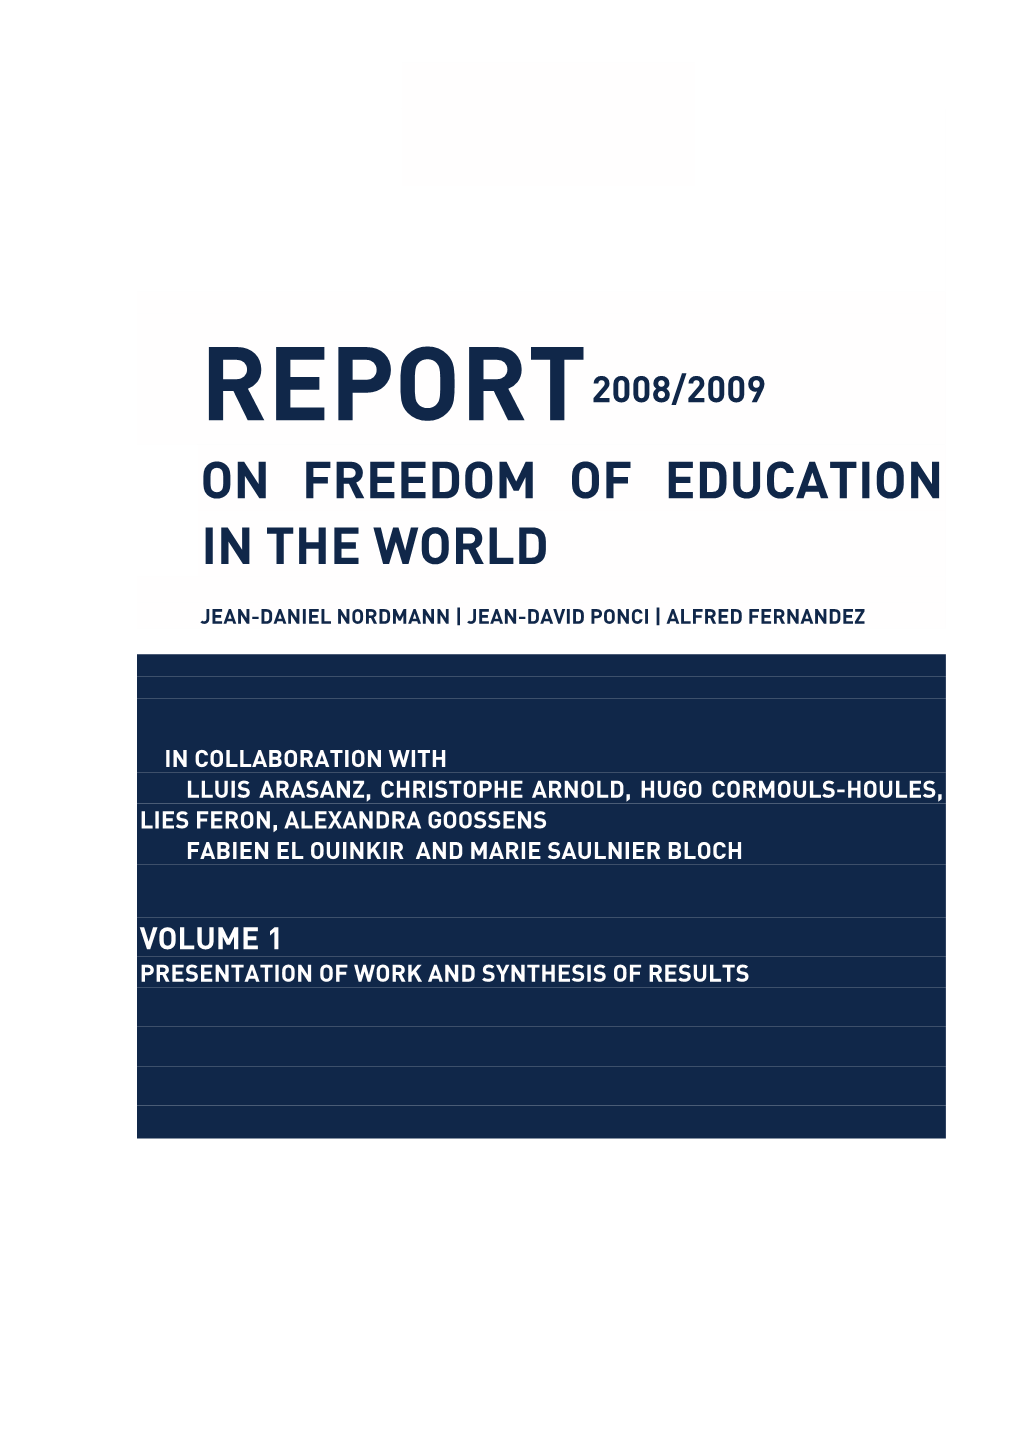 On Freedom of Education in the World